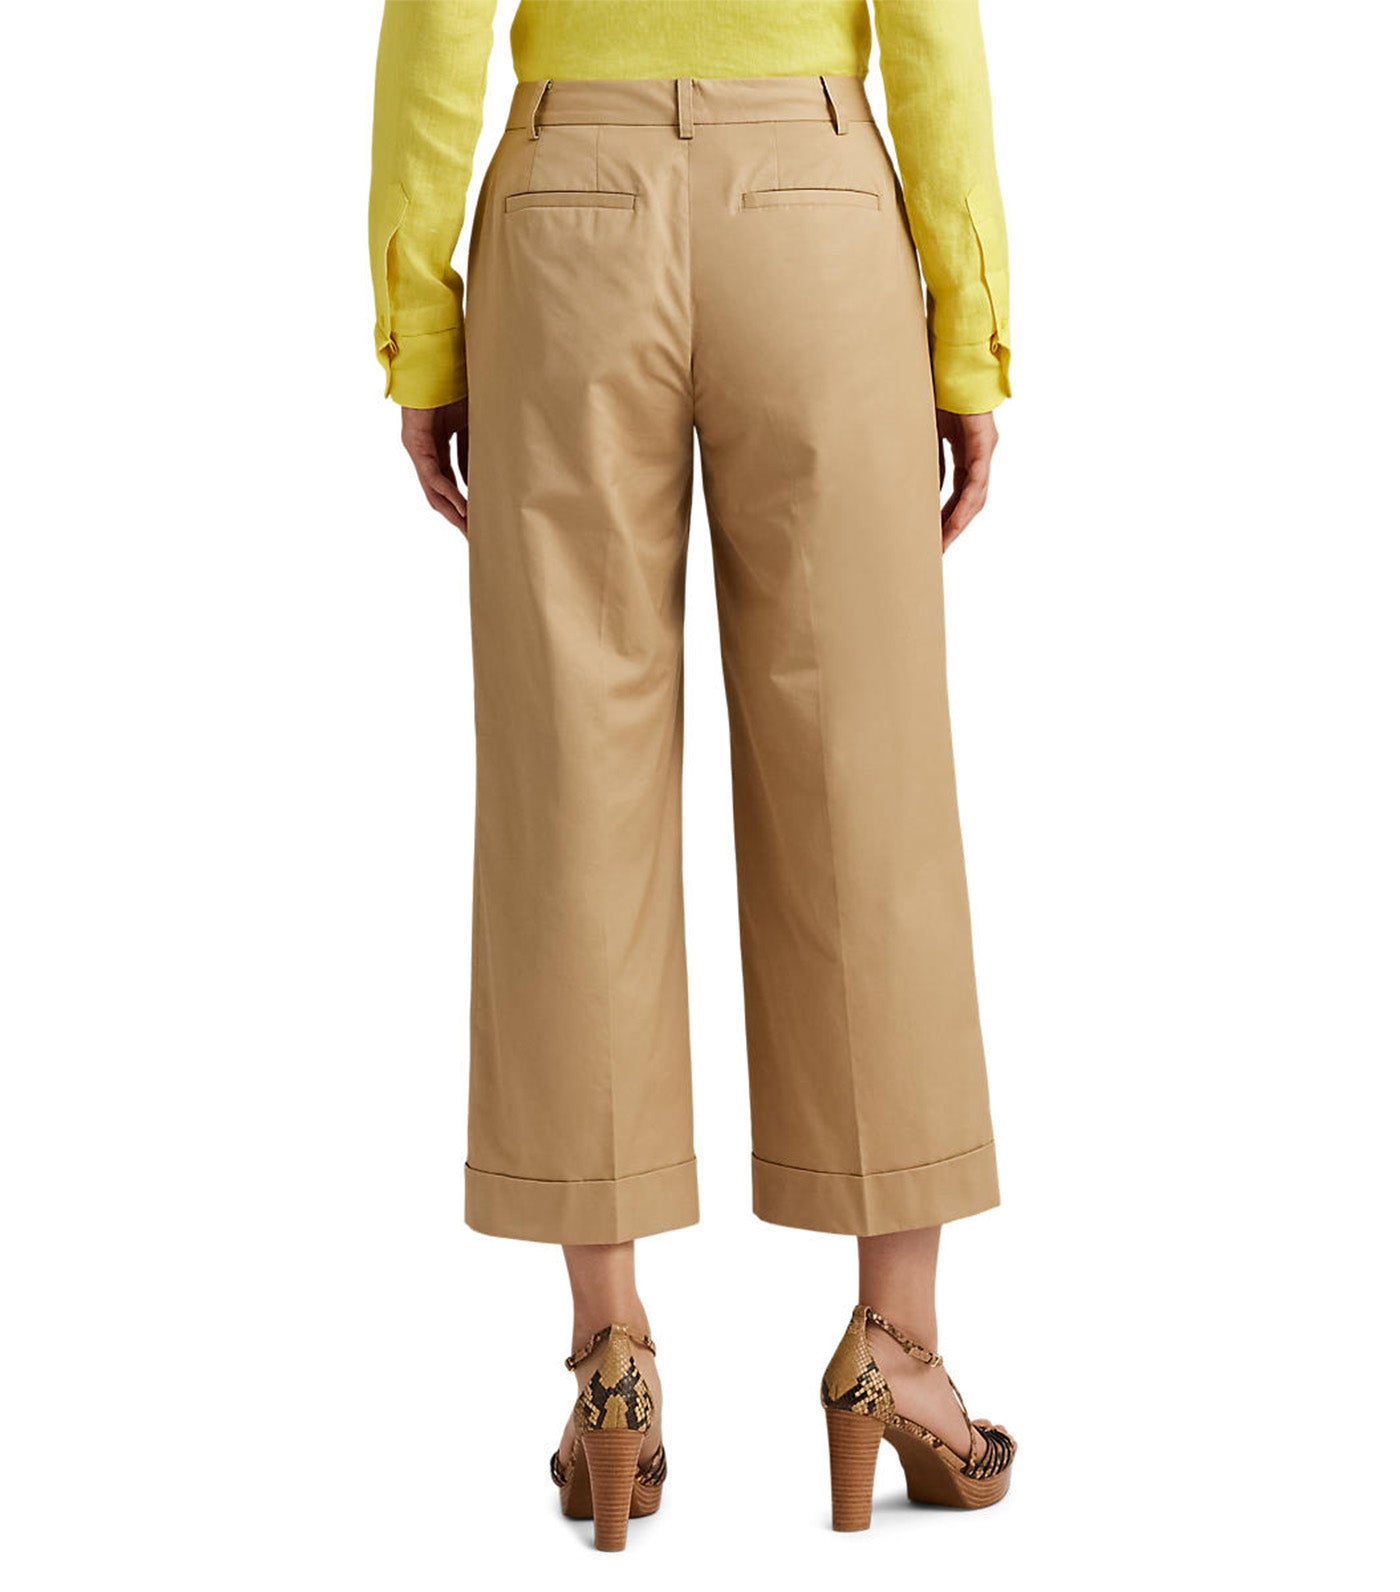 Women's Pleated Cotton Twill Cropped Pant Birch Tan